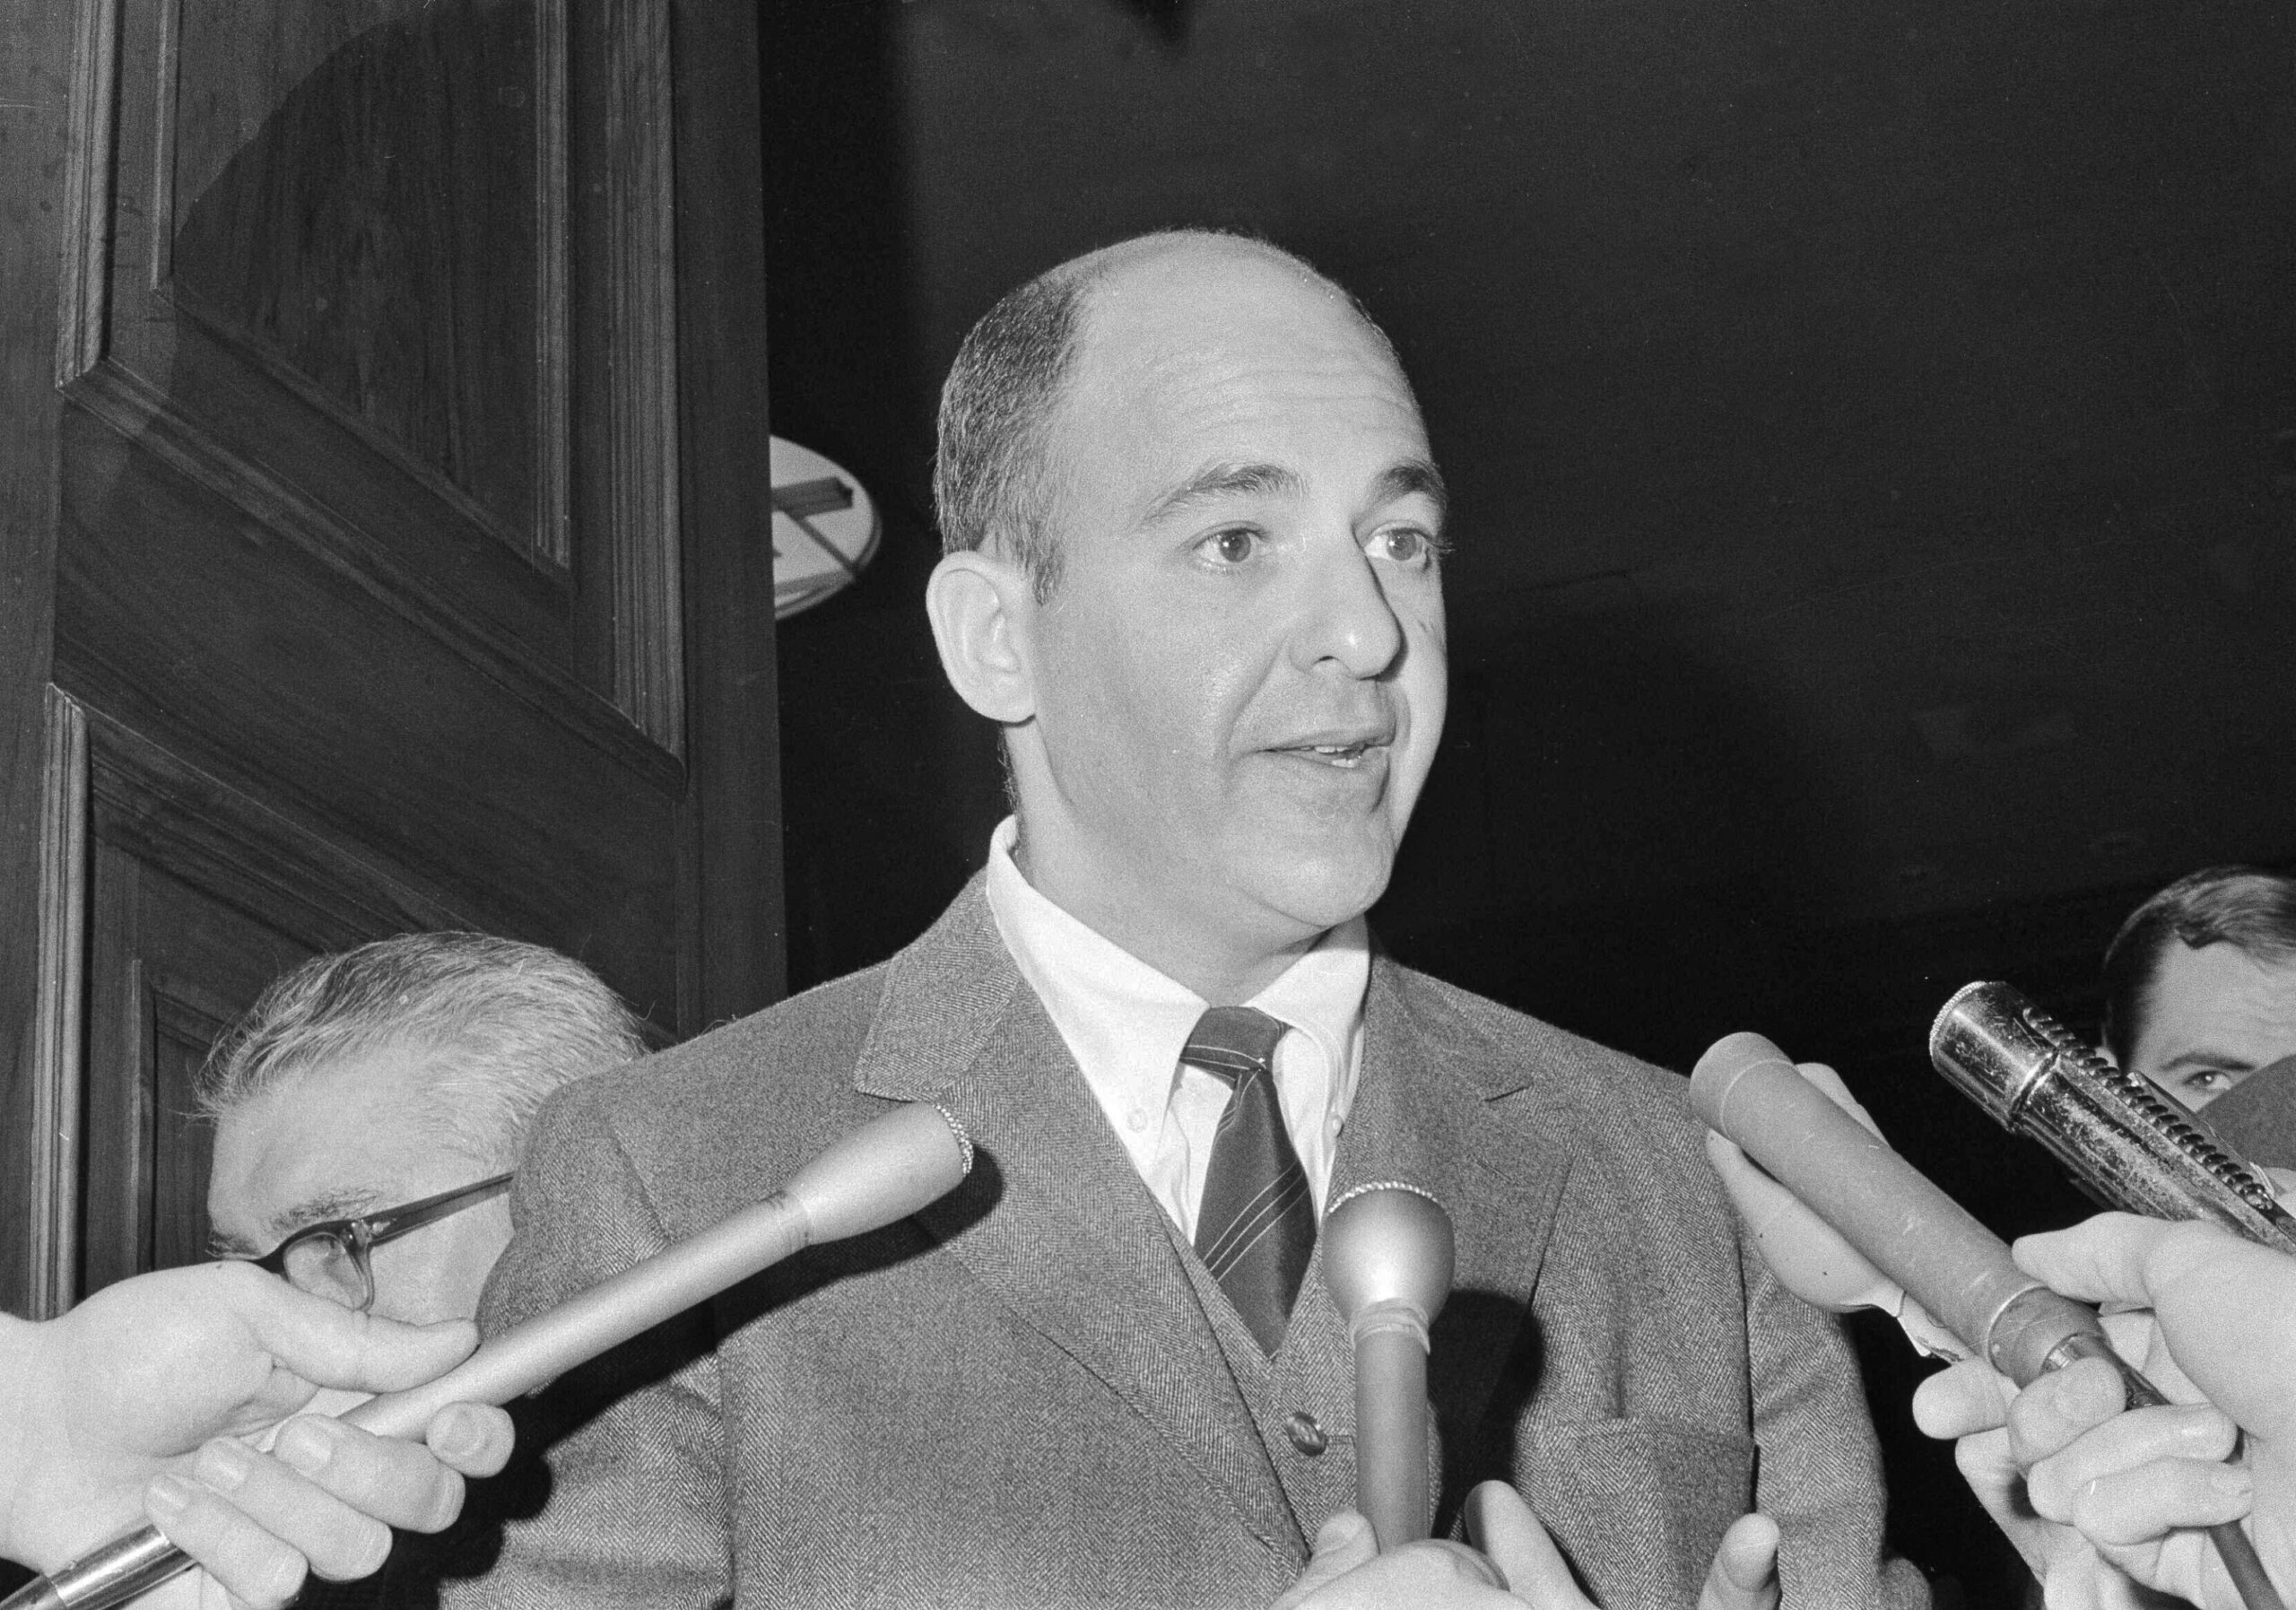 Dr. Cyril Wecht, celebrity pathologist who argued more than 1 shooter killed JFK, dies at 93 - WTOP News